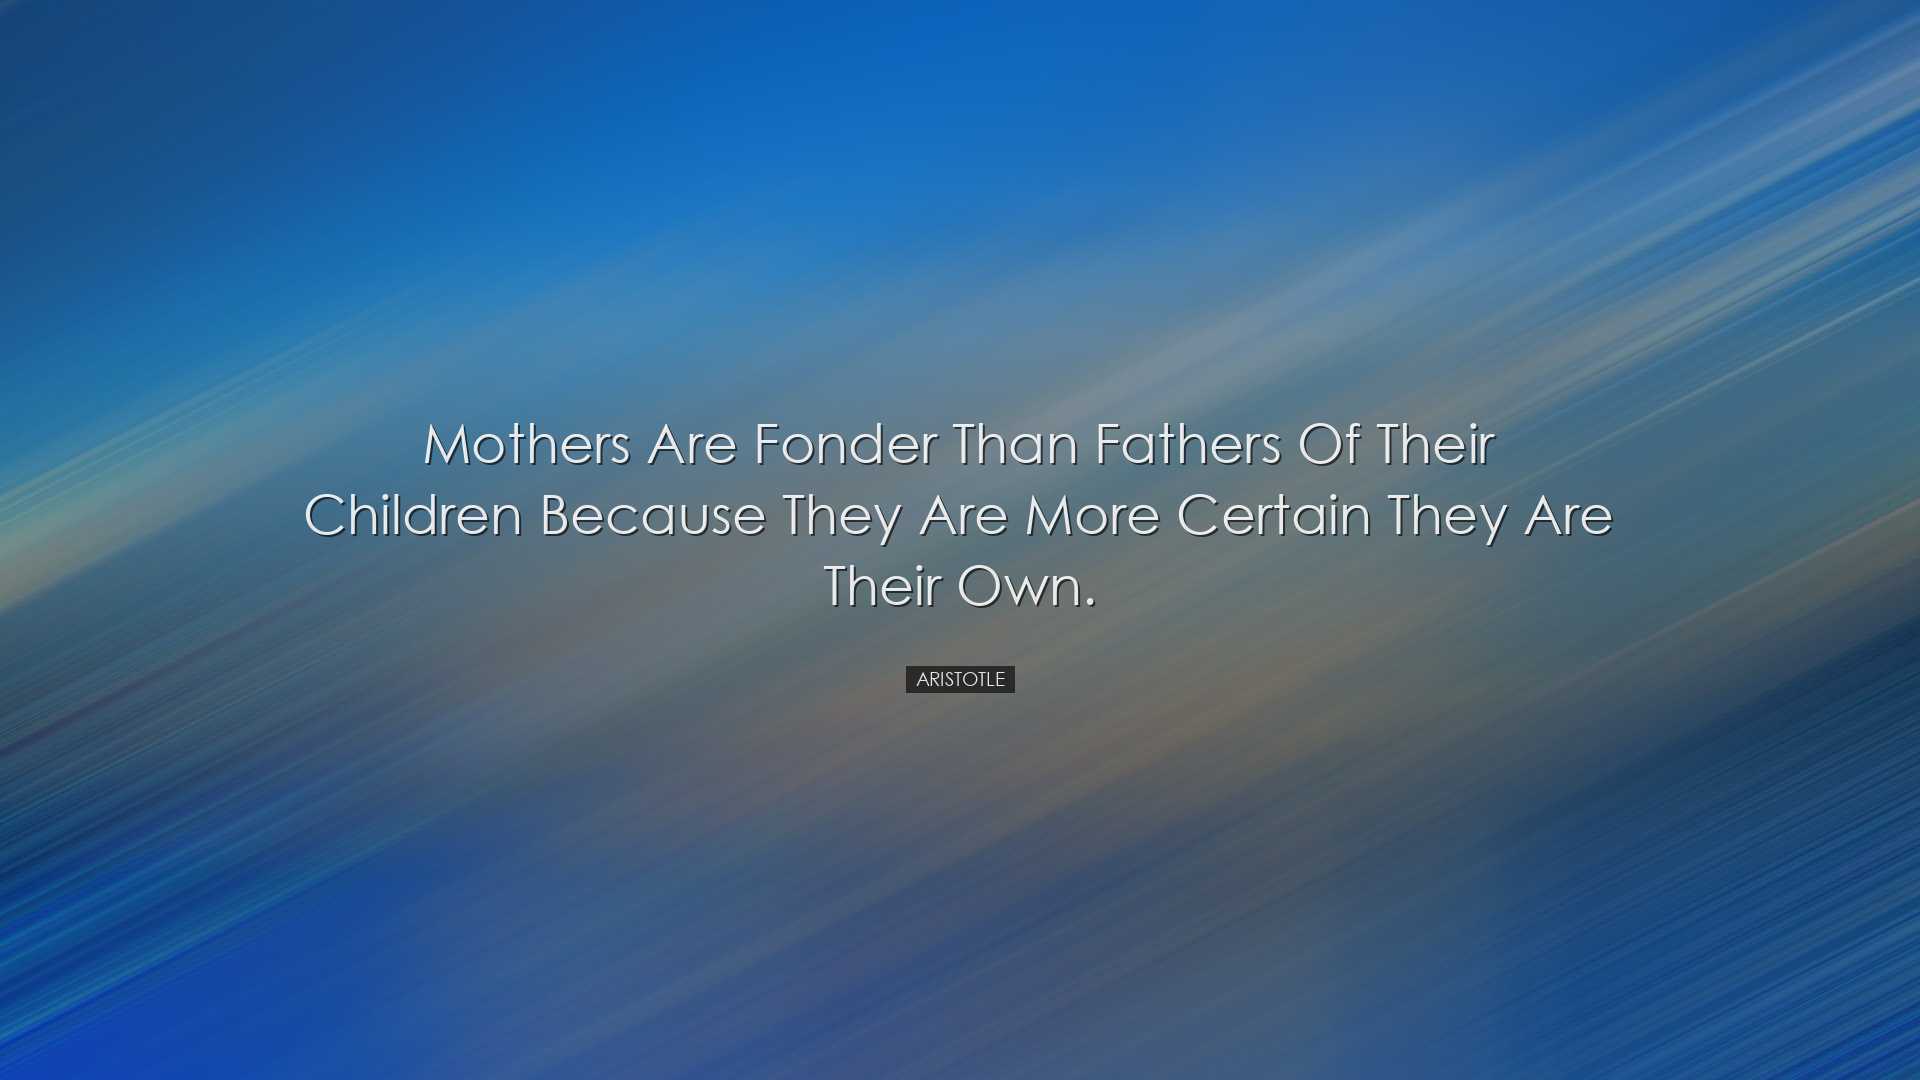 Mothers are fonder than fathers of their children because they are